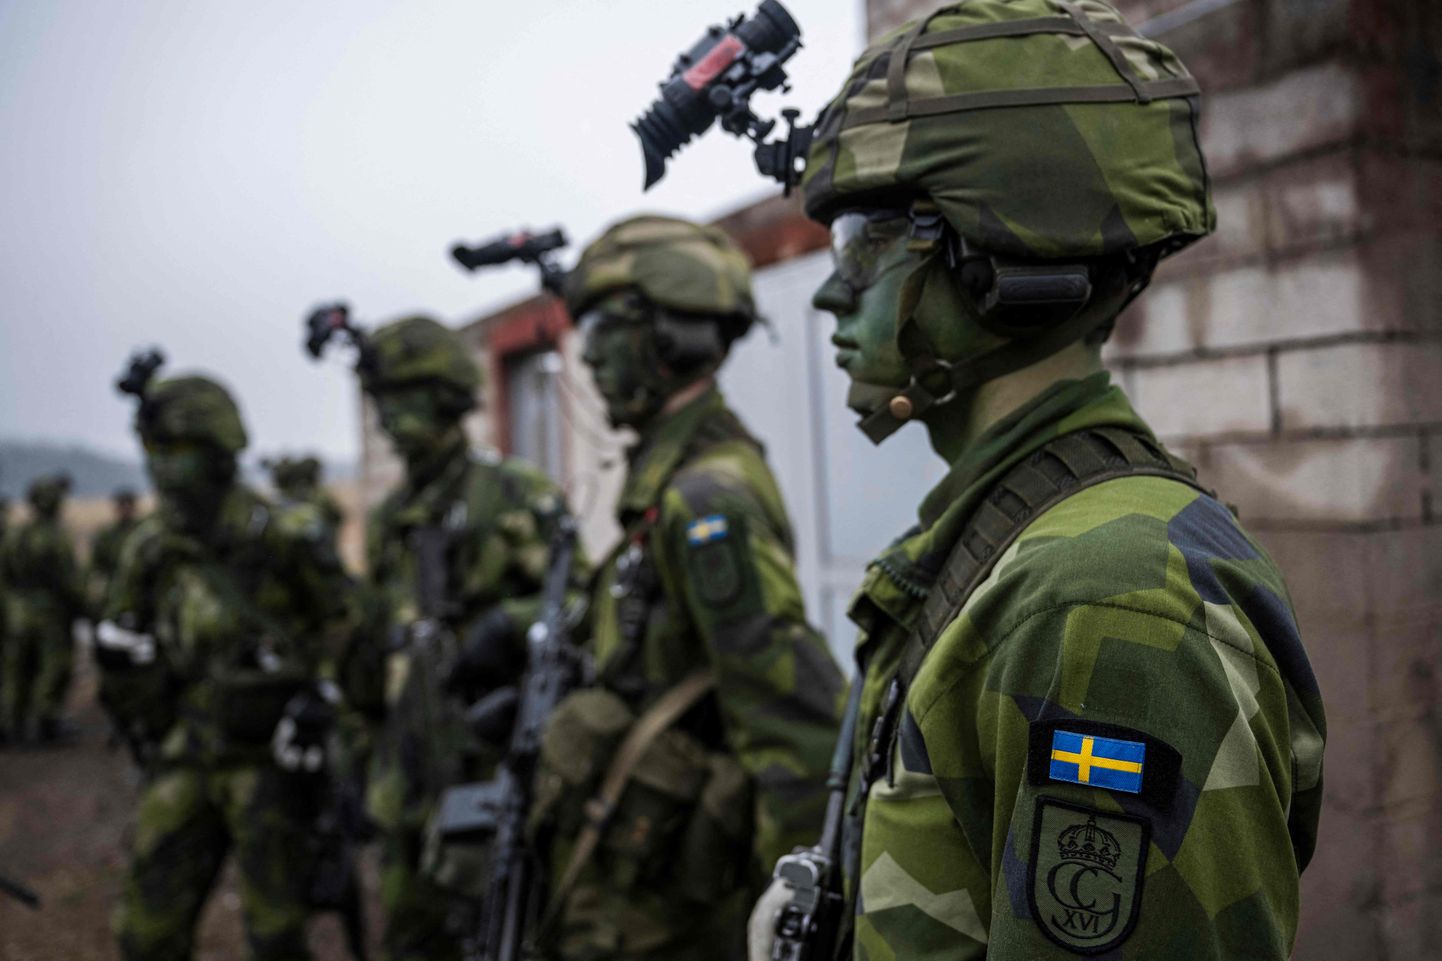 Soldiers from the 13th counter intelligence battalion, 2nd reconnaissance platoon of the Swedish Armed Forces, participate in military exercise in Kungsangen, near Stockholm on February 27, 2024.